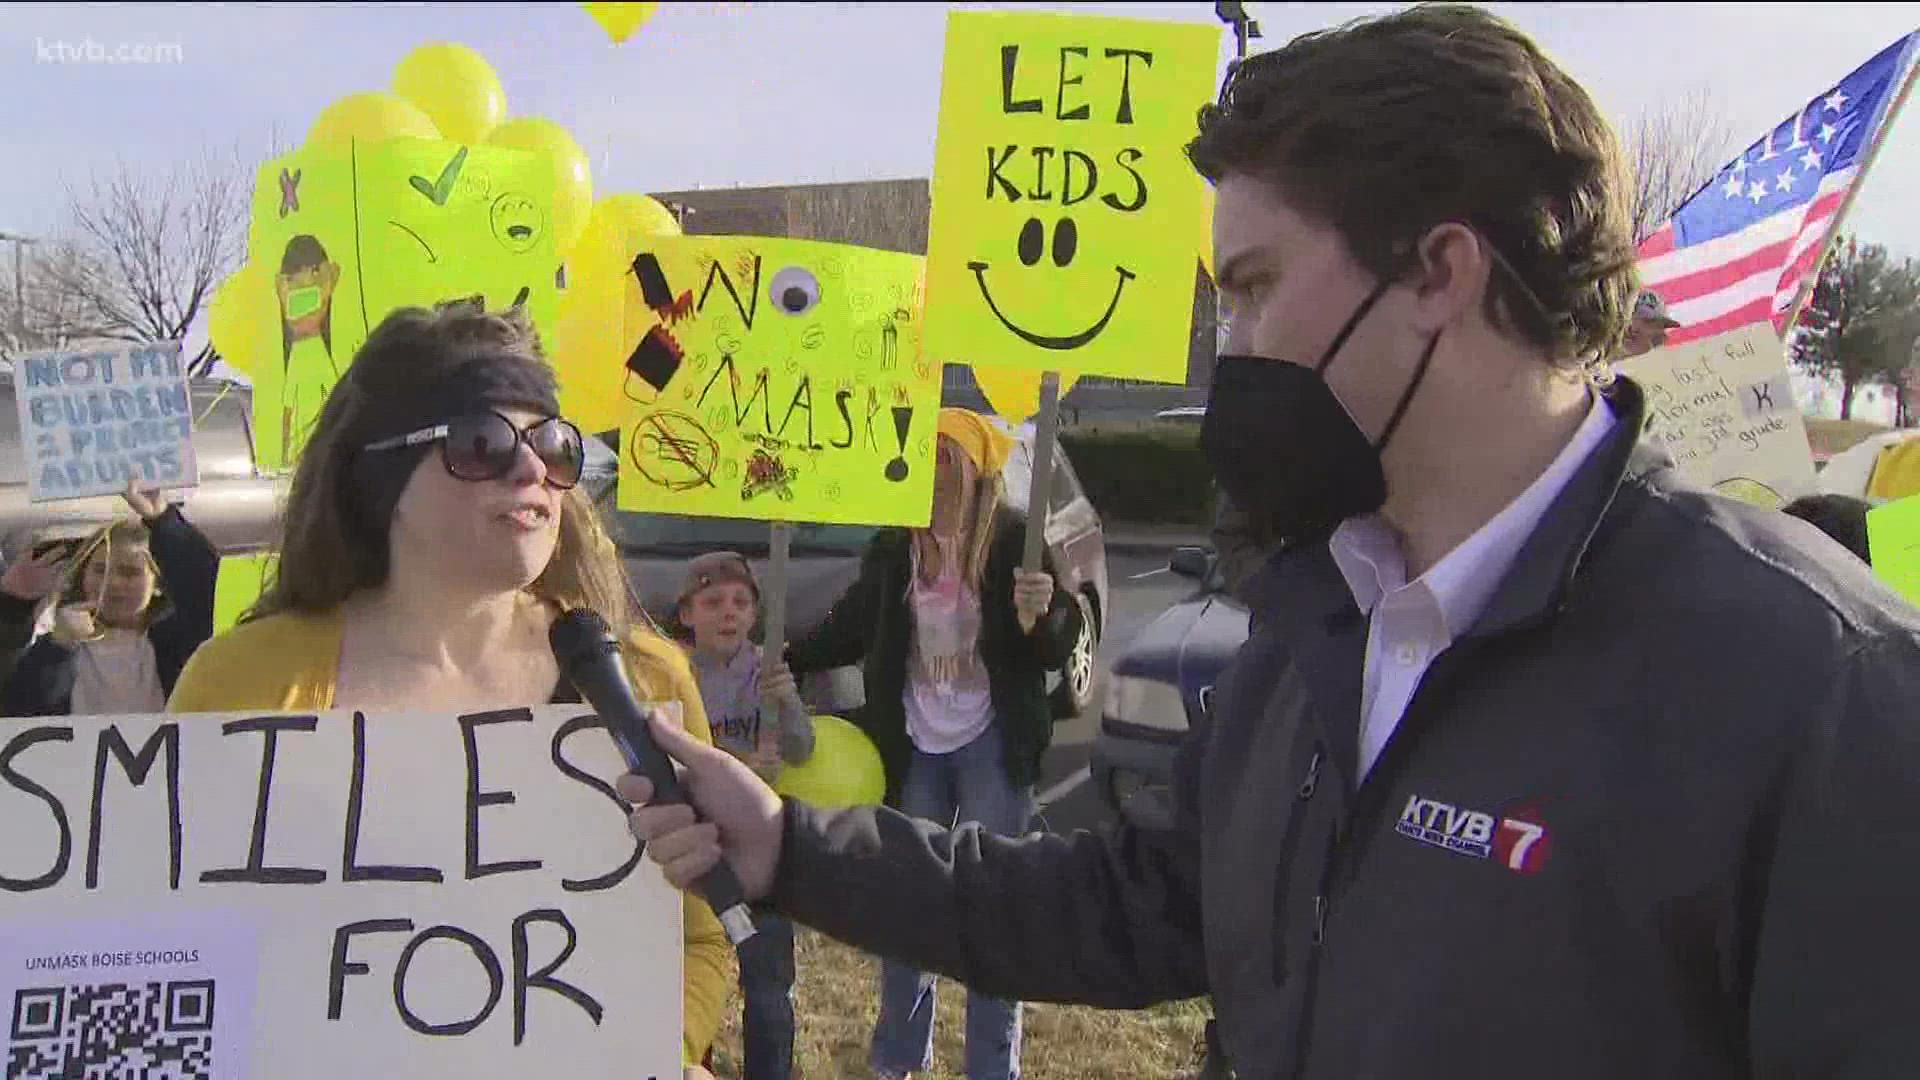 Parents gathered Friday afternoon outside the Boise School District office in favor of ending the district's mask mandate ahead of its board meeting Monday, Feb. 14.